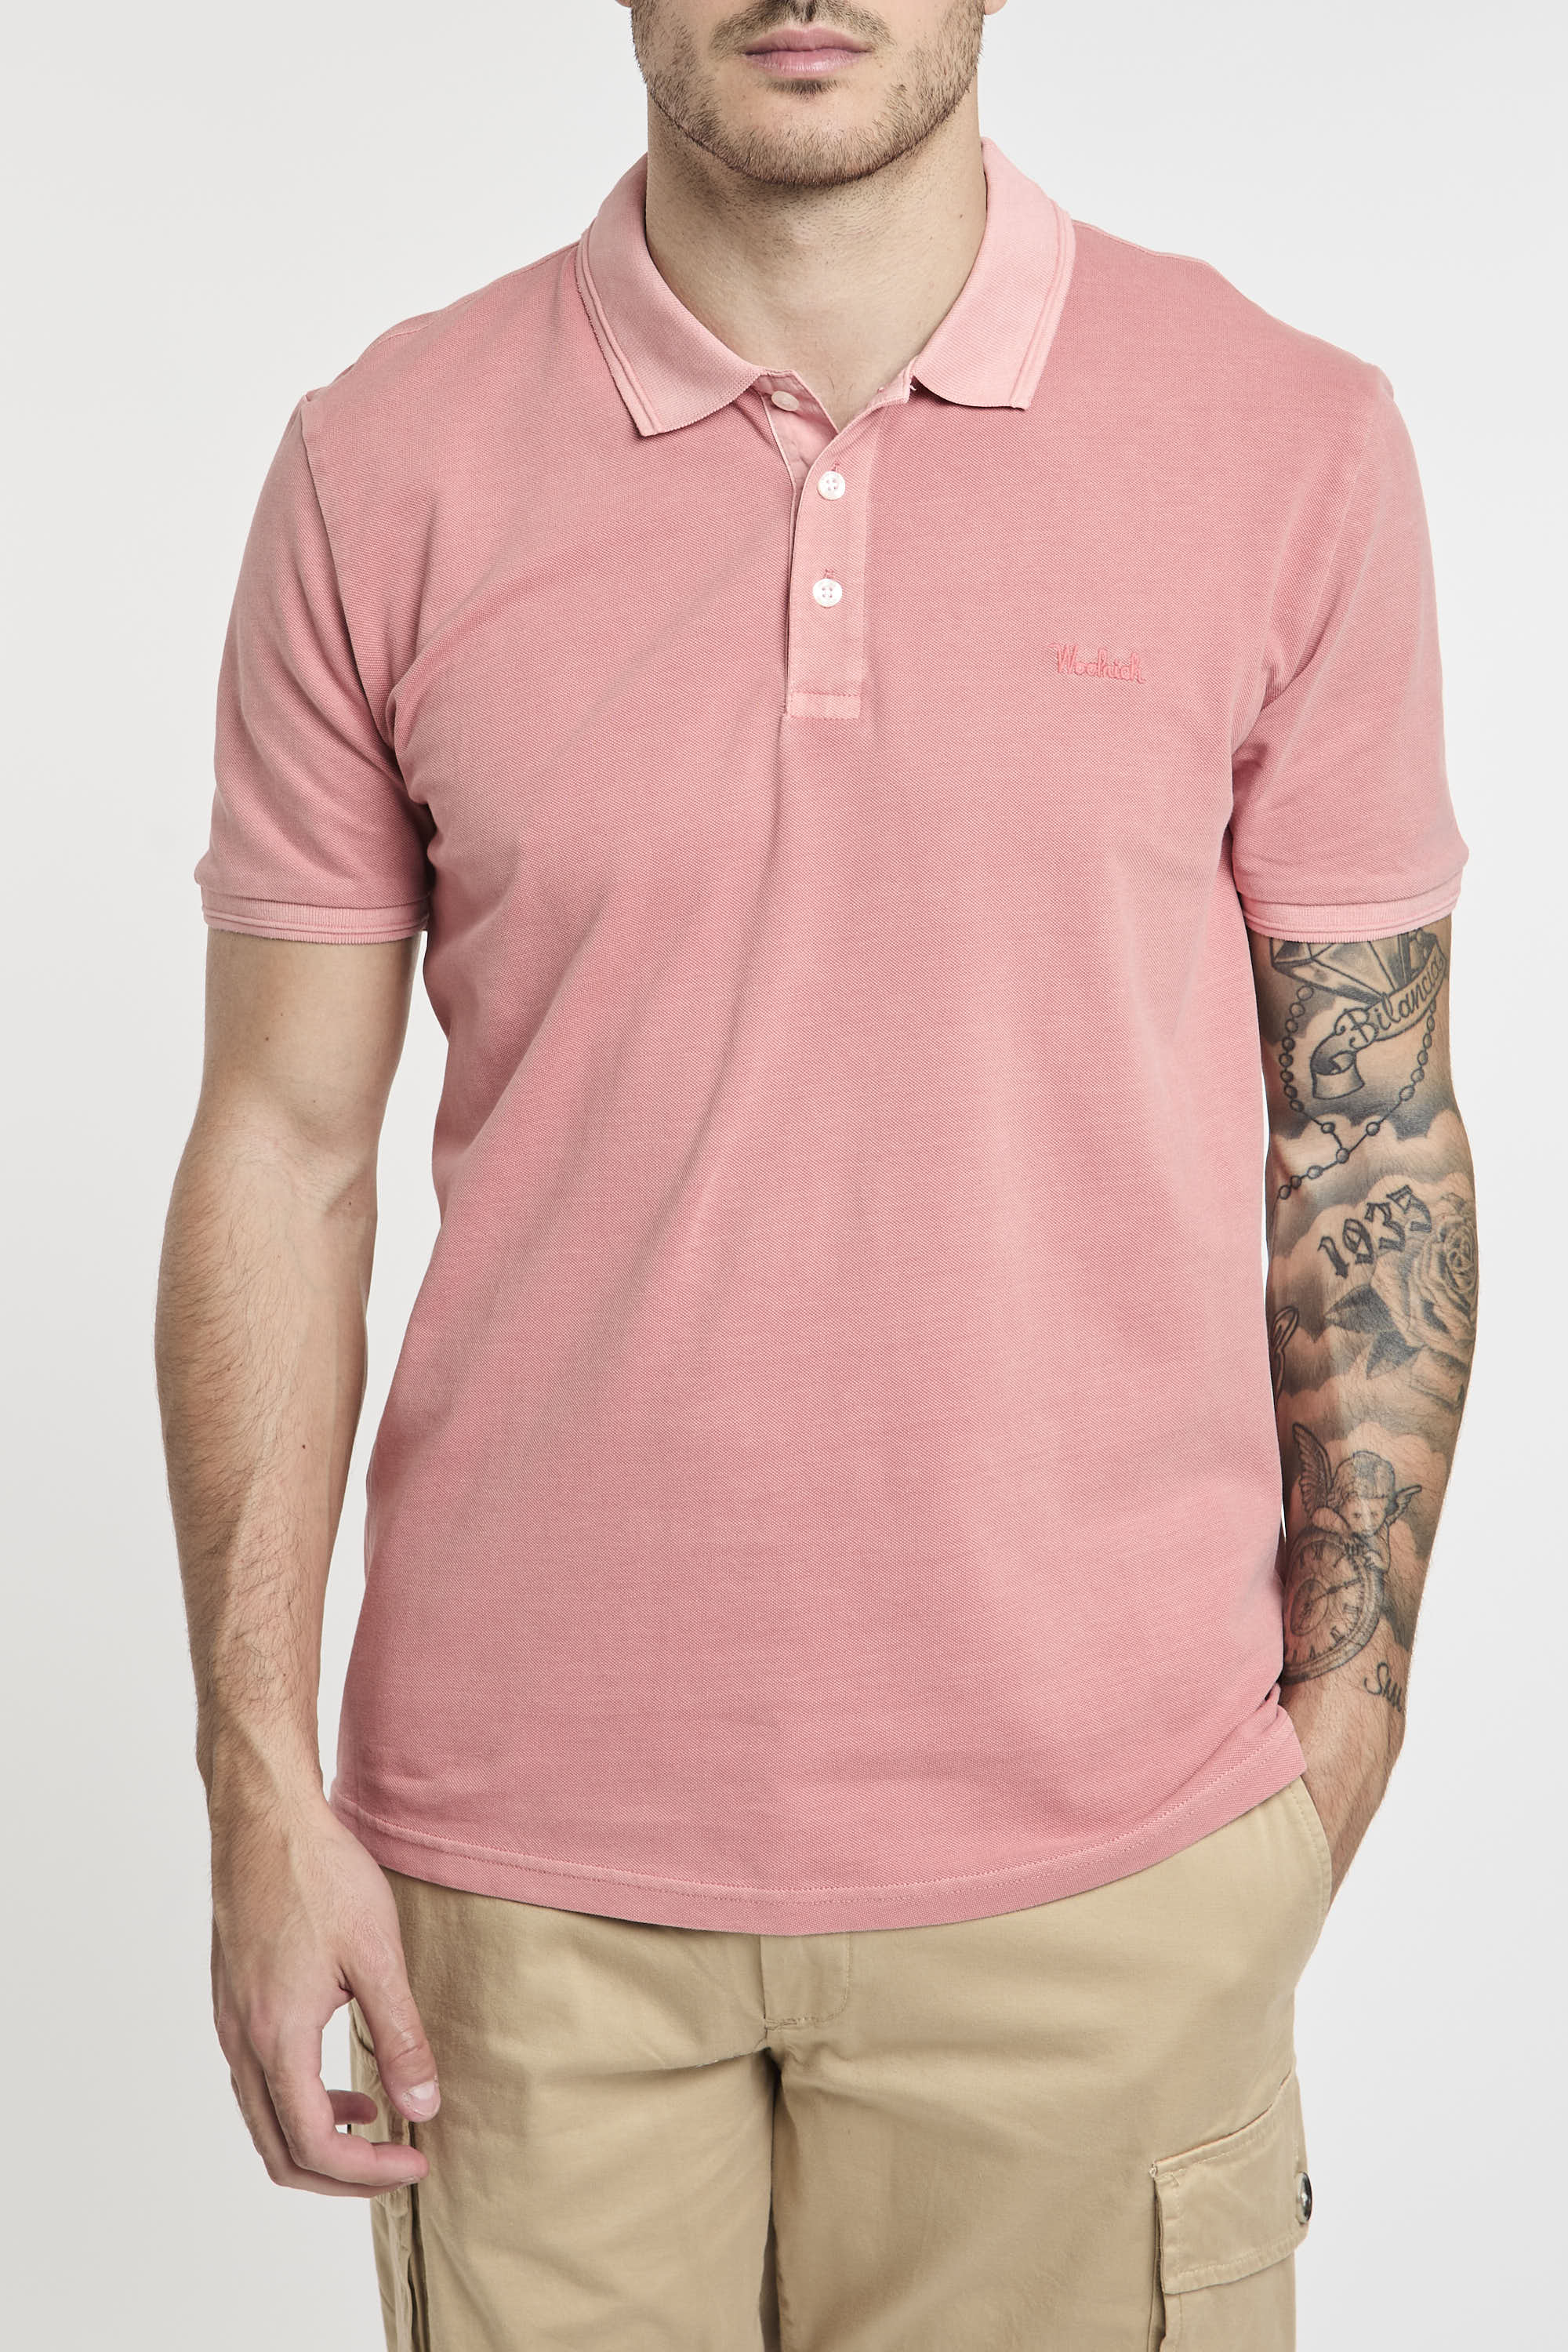 Woolrich Mackinack Stretch Cotton Piqué Polo in Red-1